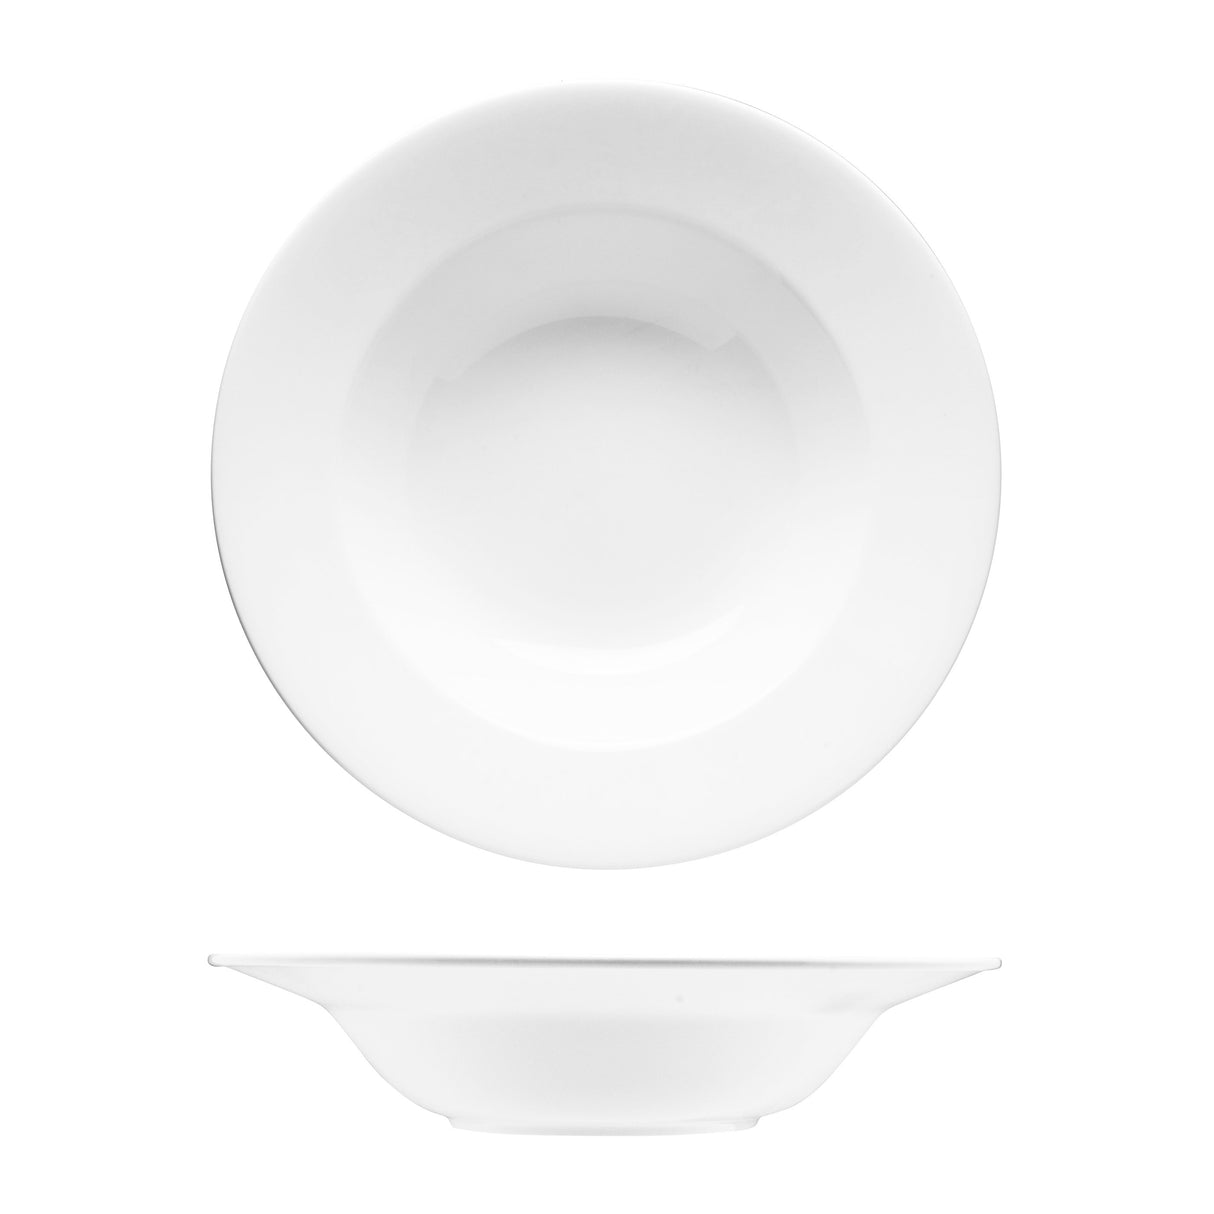 Deep Wide Rim Bowl - 280Mm, Ilona from Fortessa. Deep, made out of Bone China and sold in boxes of 12. Hospitality quality at wholesale price with The Flying Fork! 